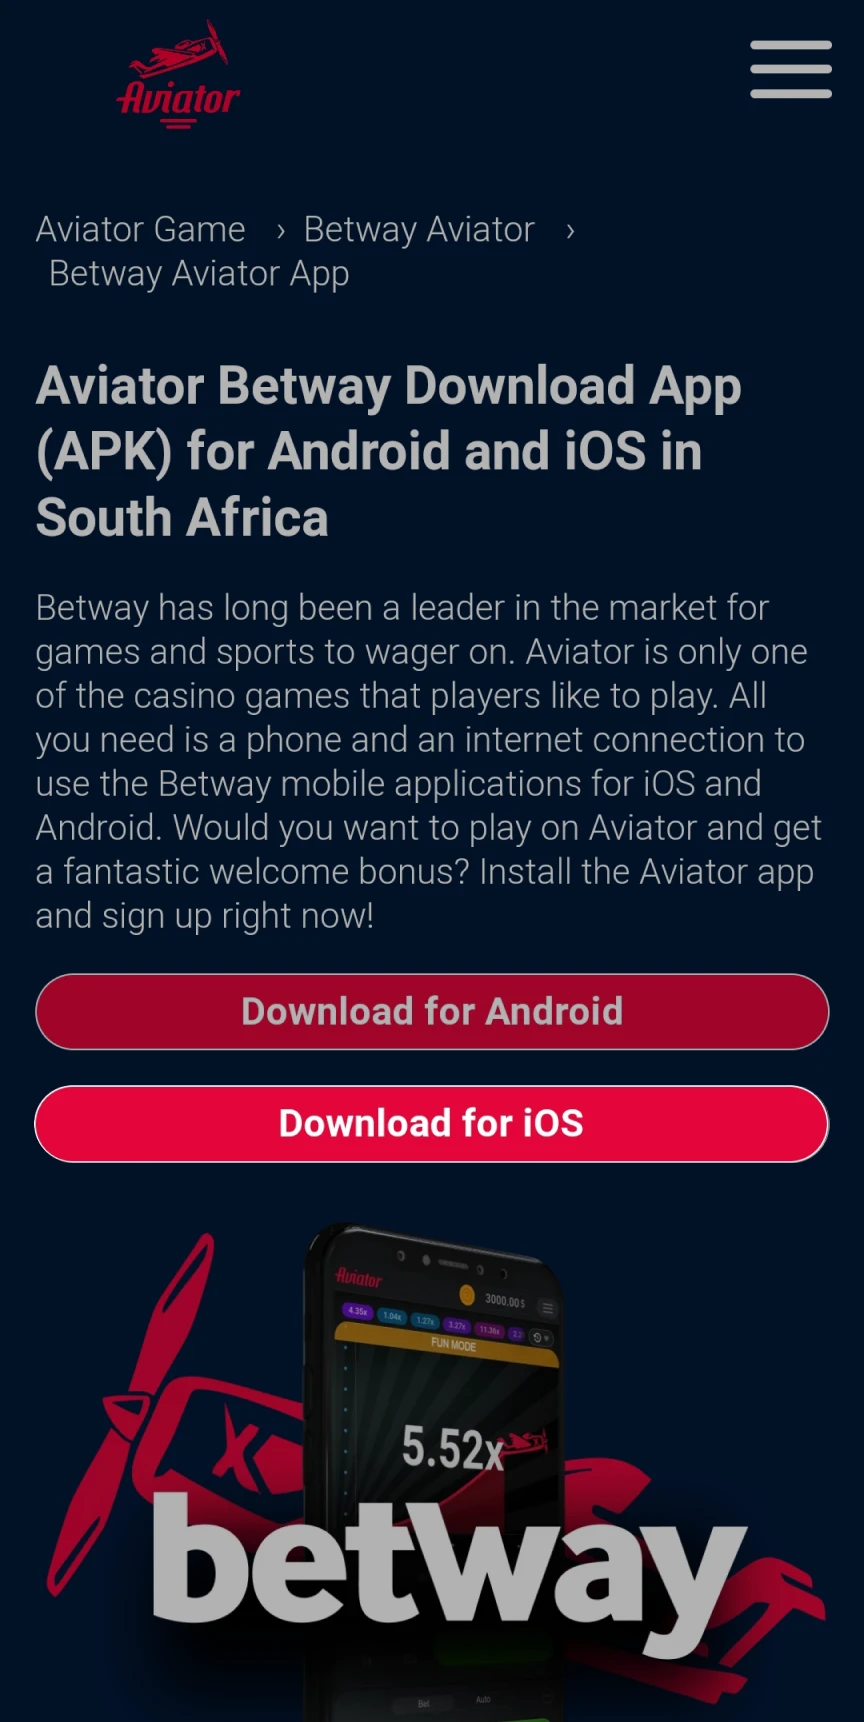 Follow the link to download the Betway application on iOS.